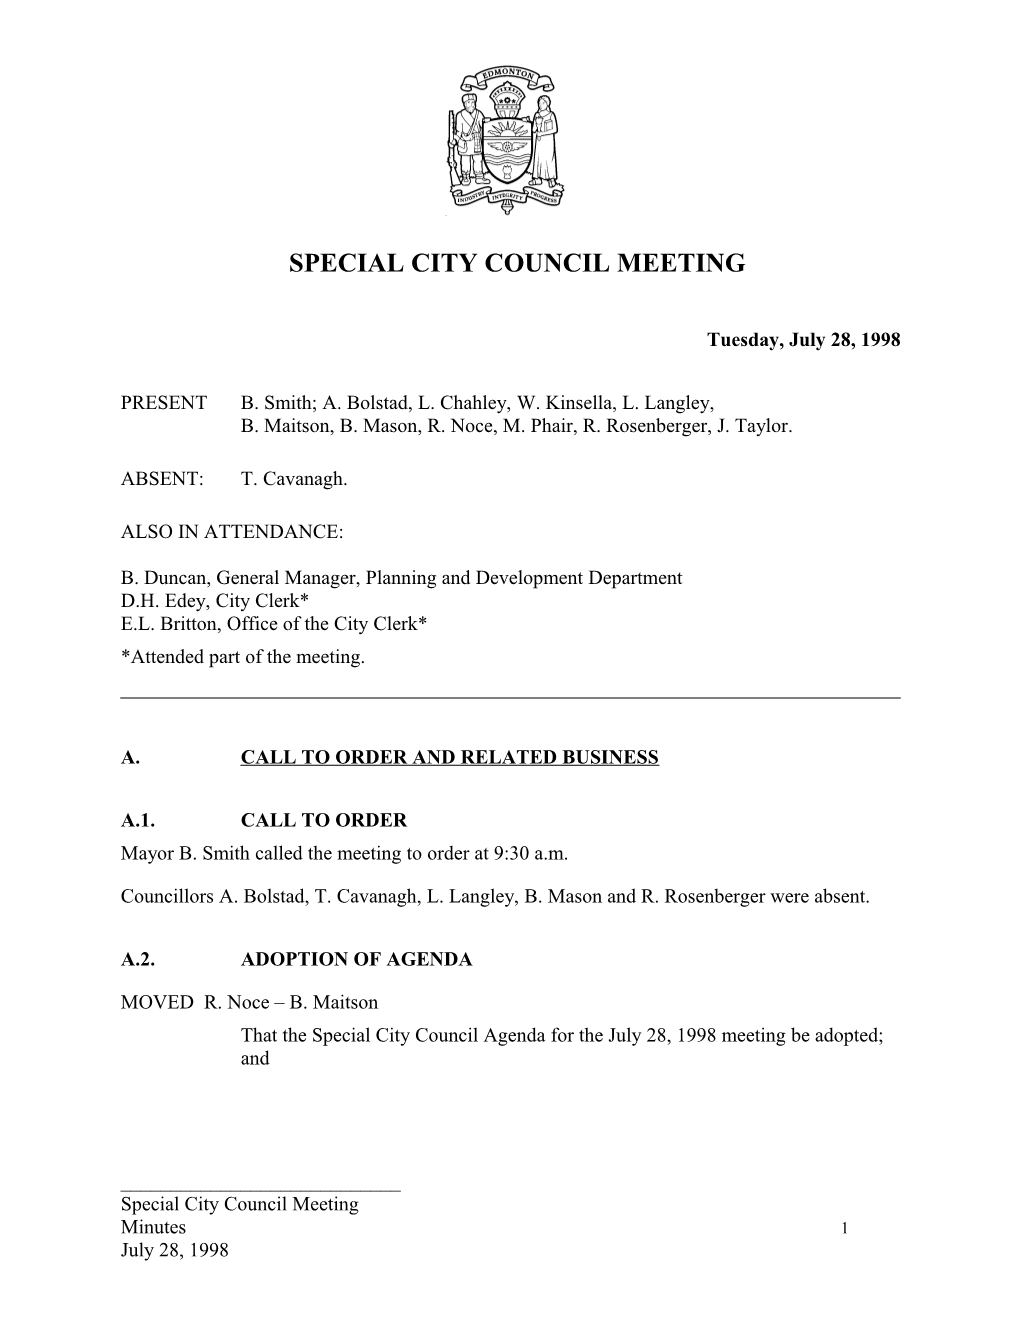 Minutes for City Council July 28, 1998 Meeting